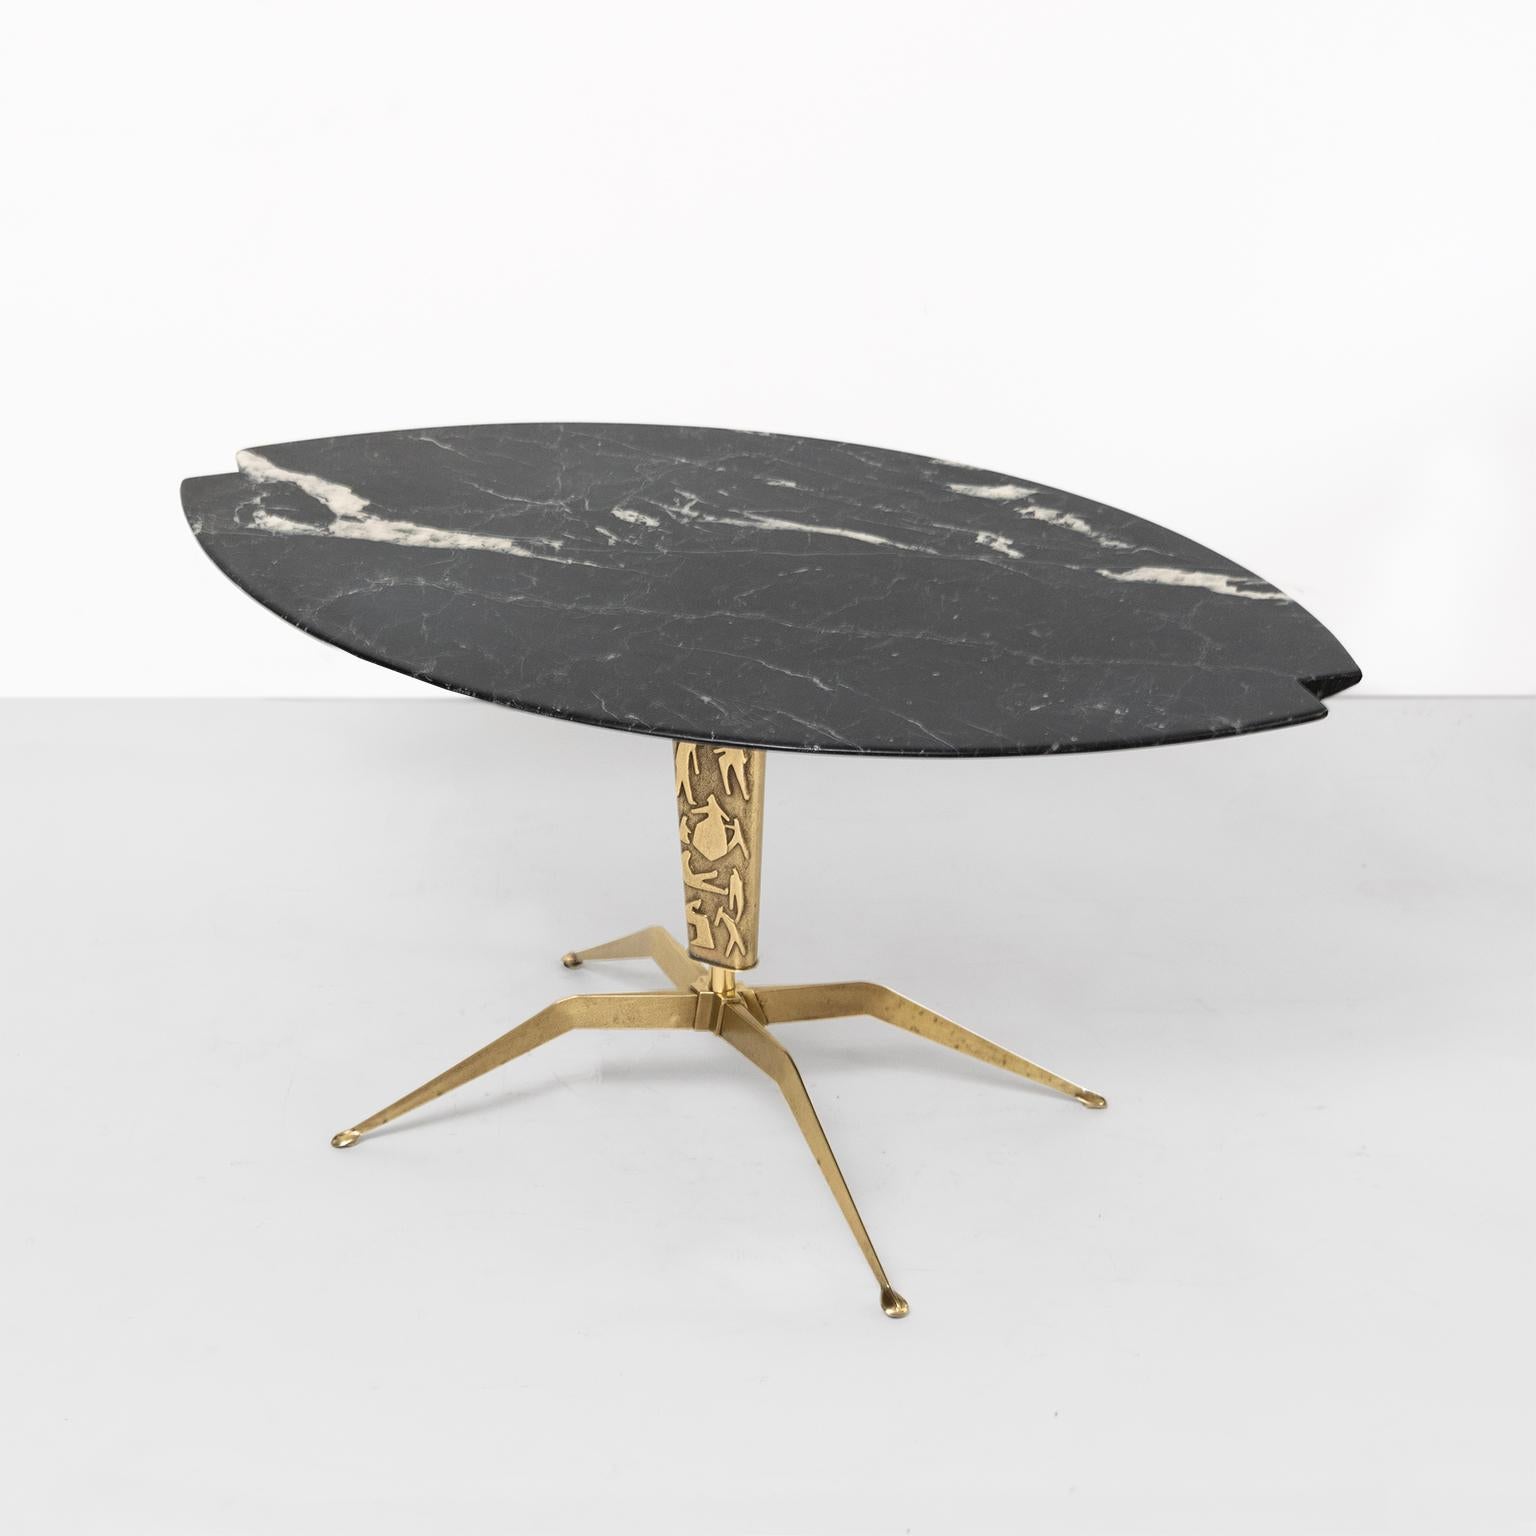 Italian midcentury coffee table with notched oval black marble top resting on a brass four legged base. The centre column is decorated with raised abstract figures in polished brass. The table suggest an impossible balancing act of stone on a